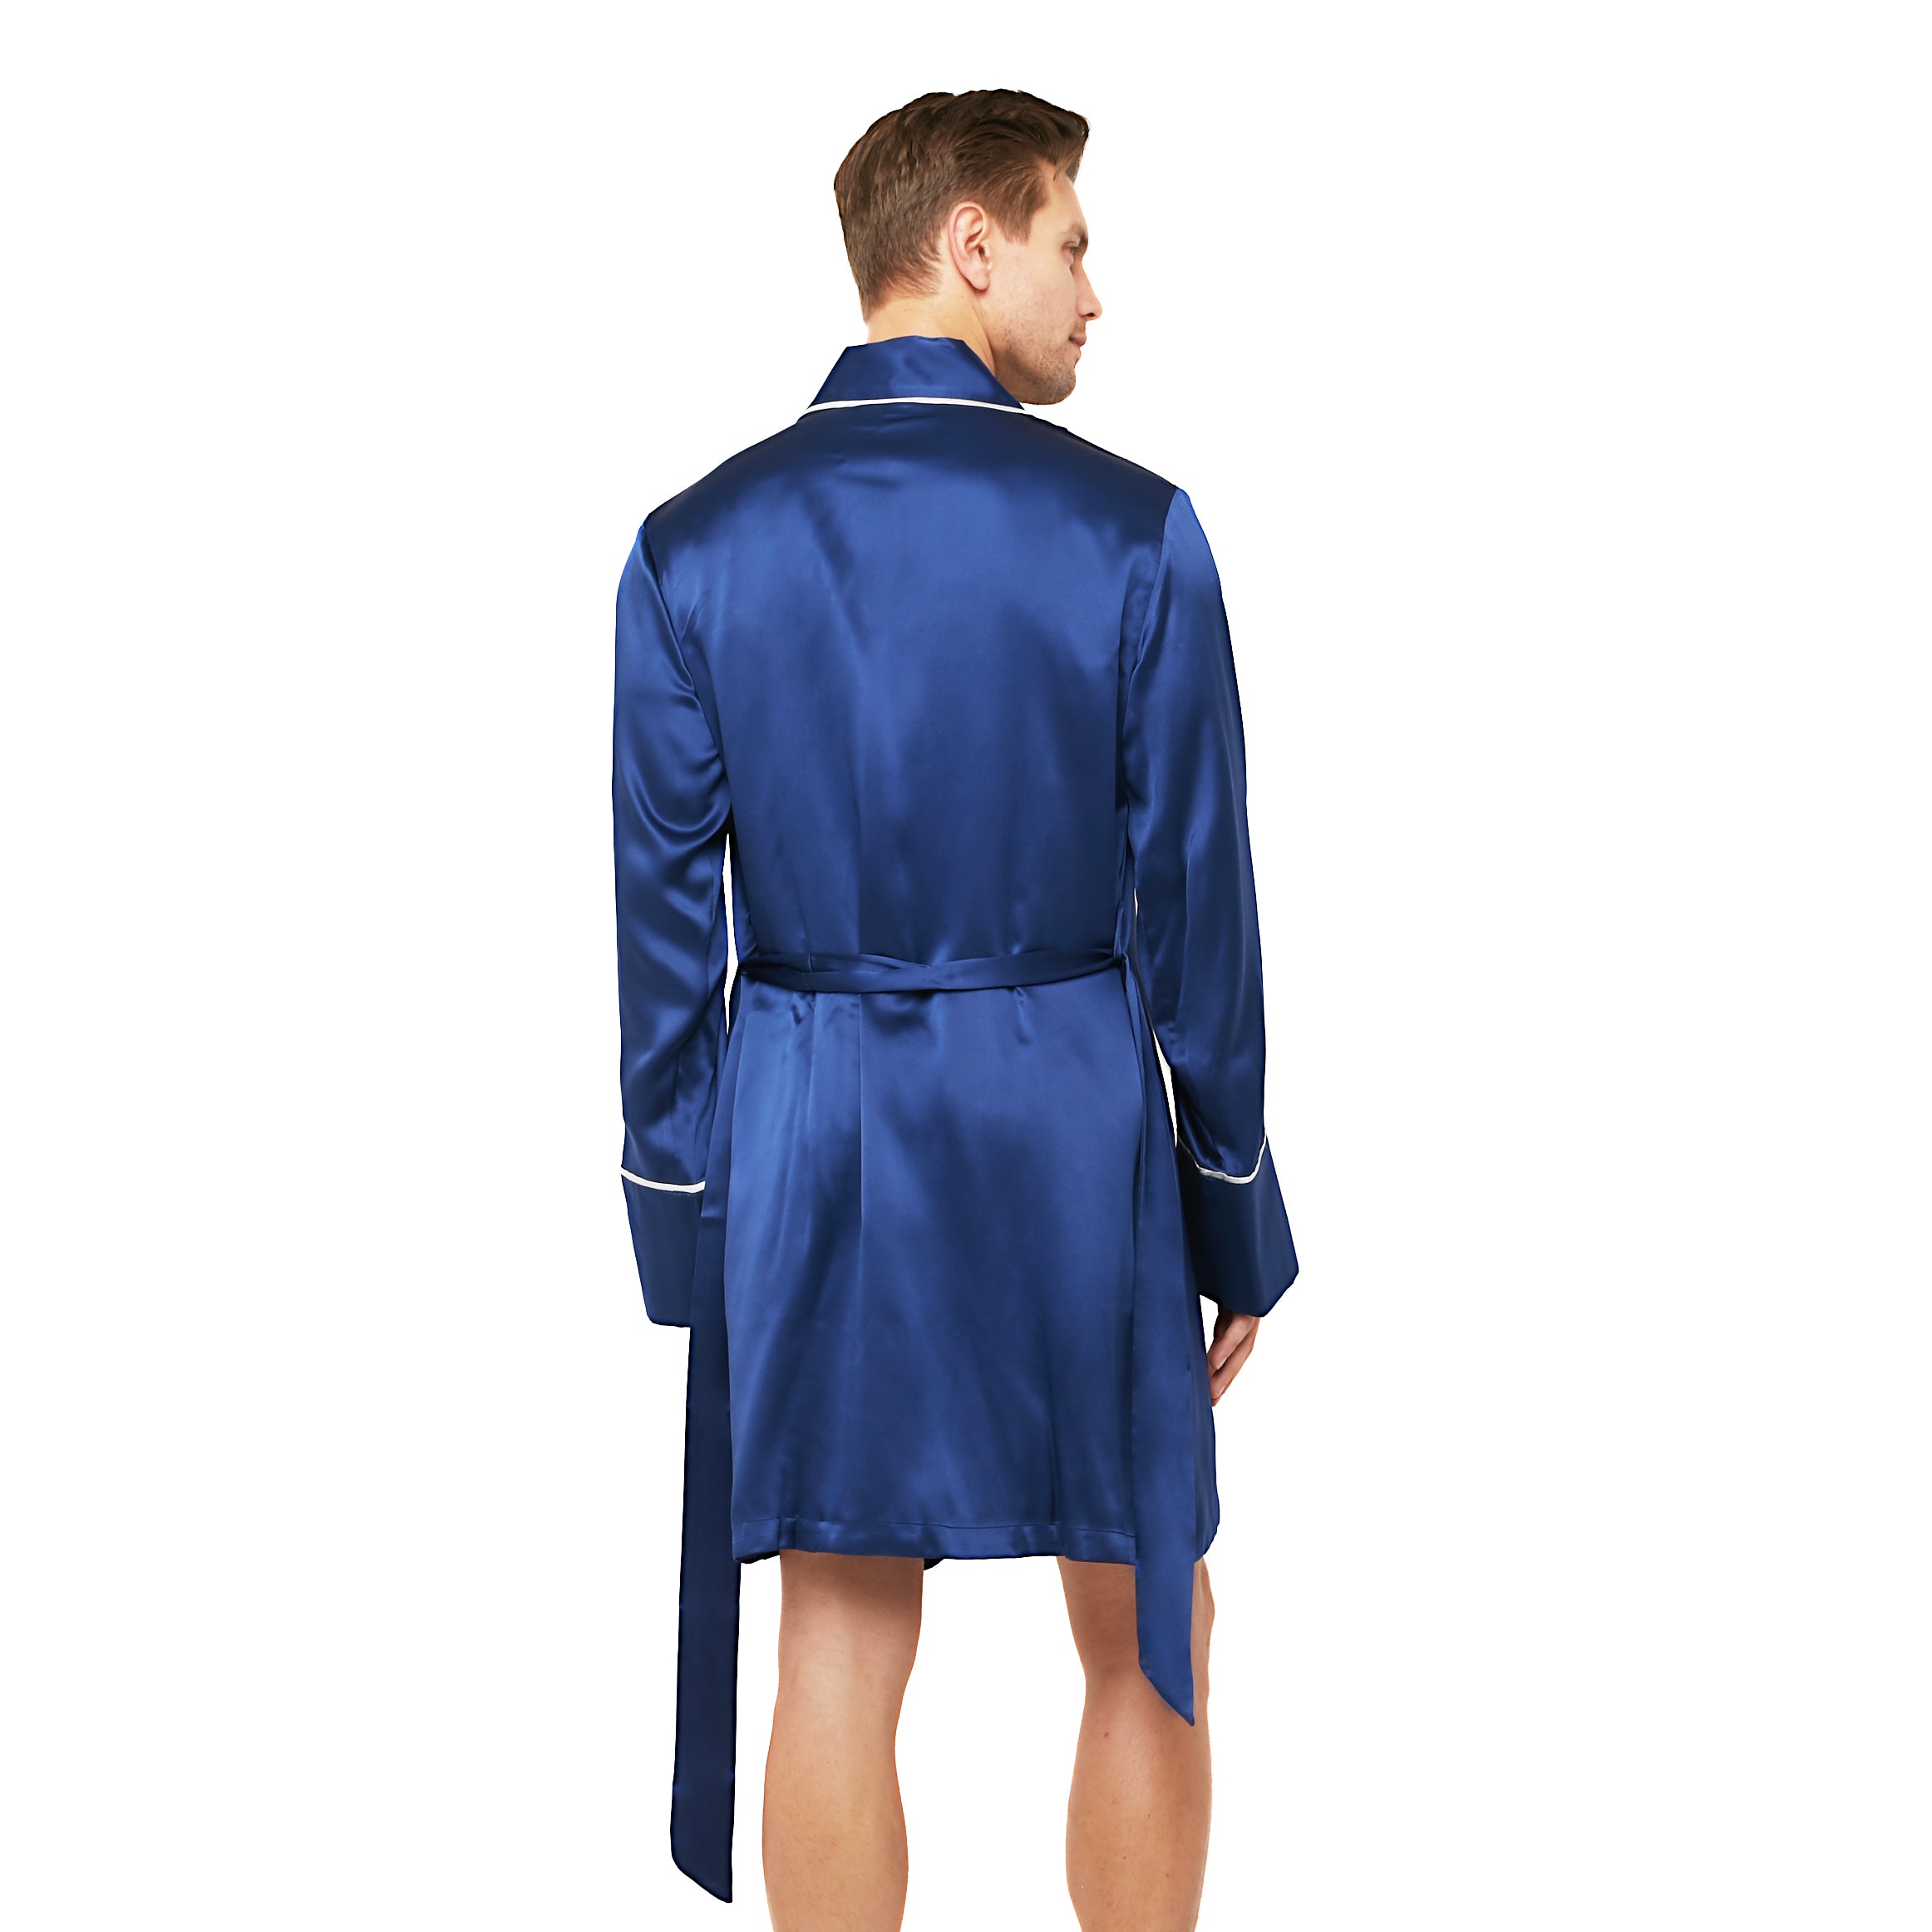 MYK Silk Men's Robe with Shawl Collar Contrast Piping